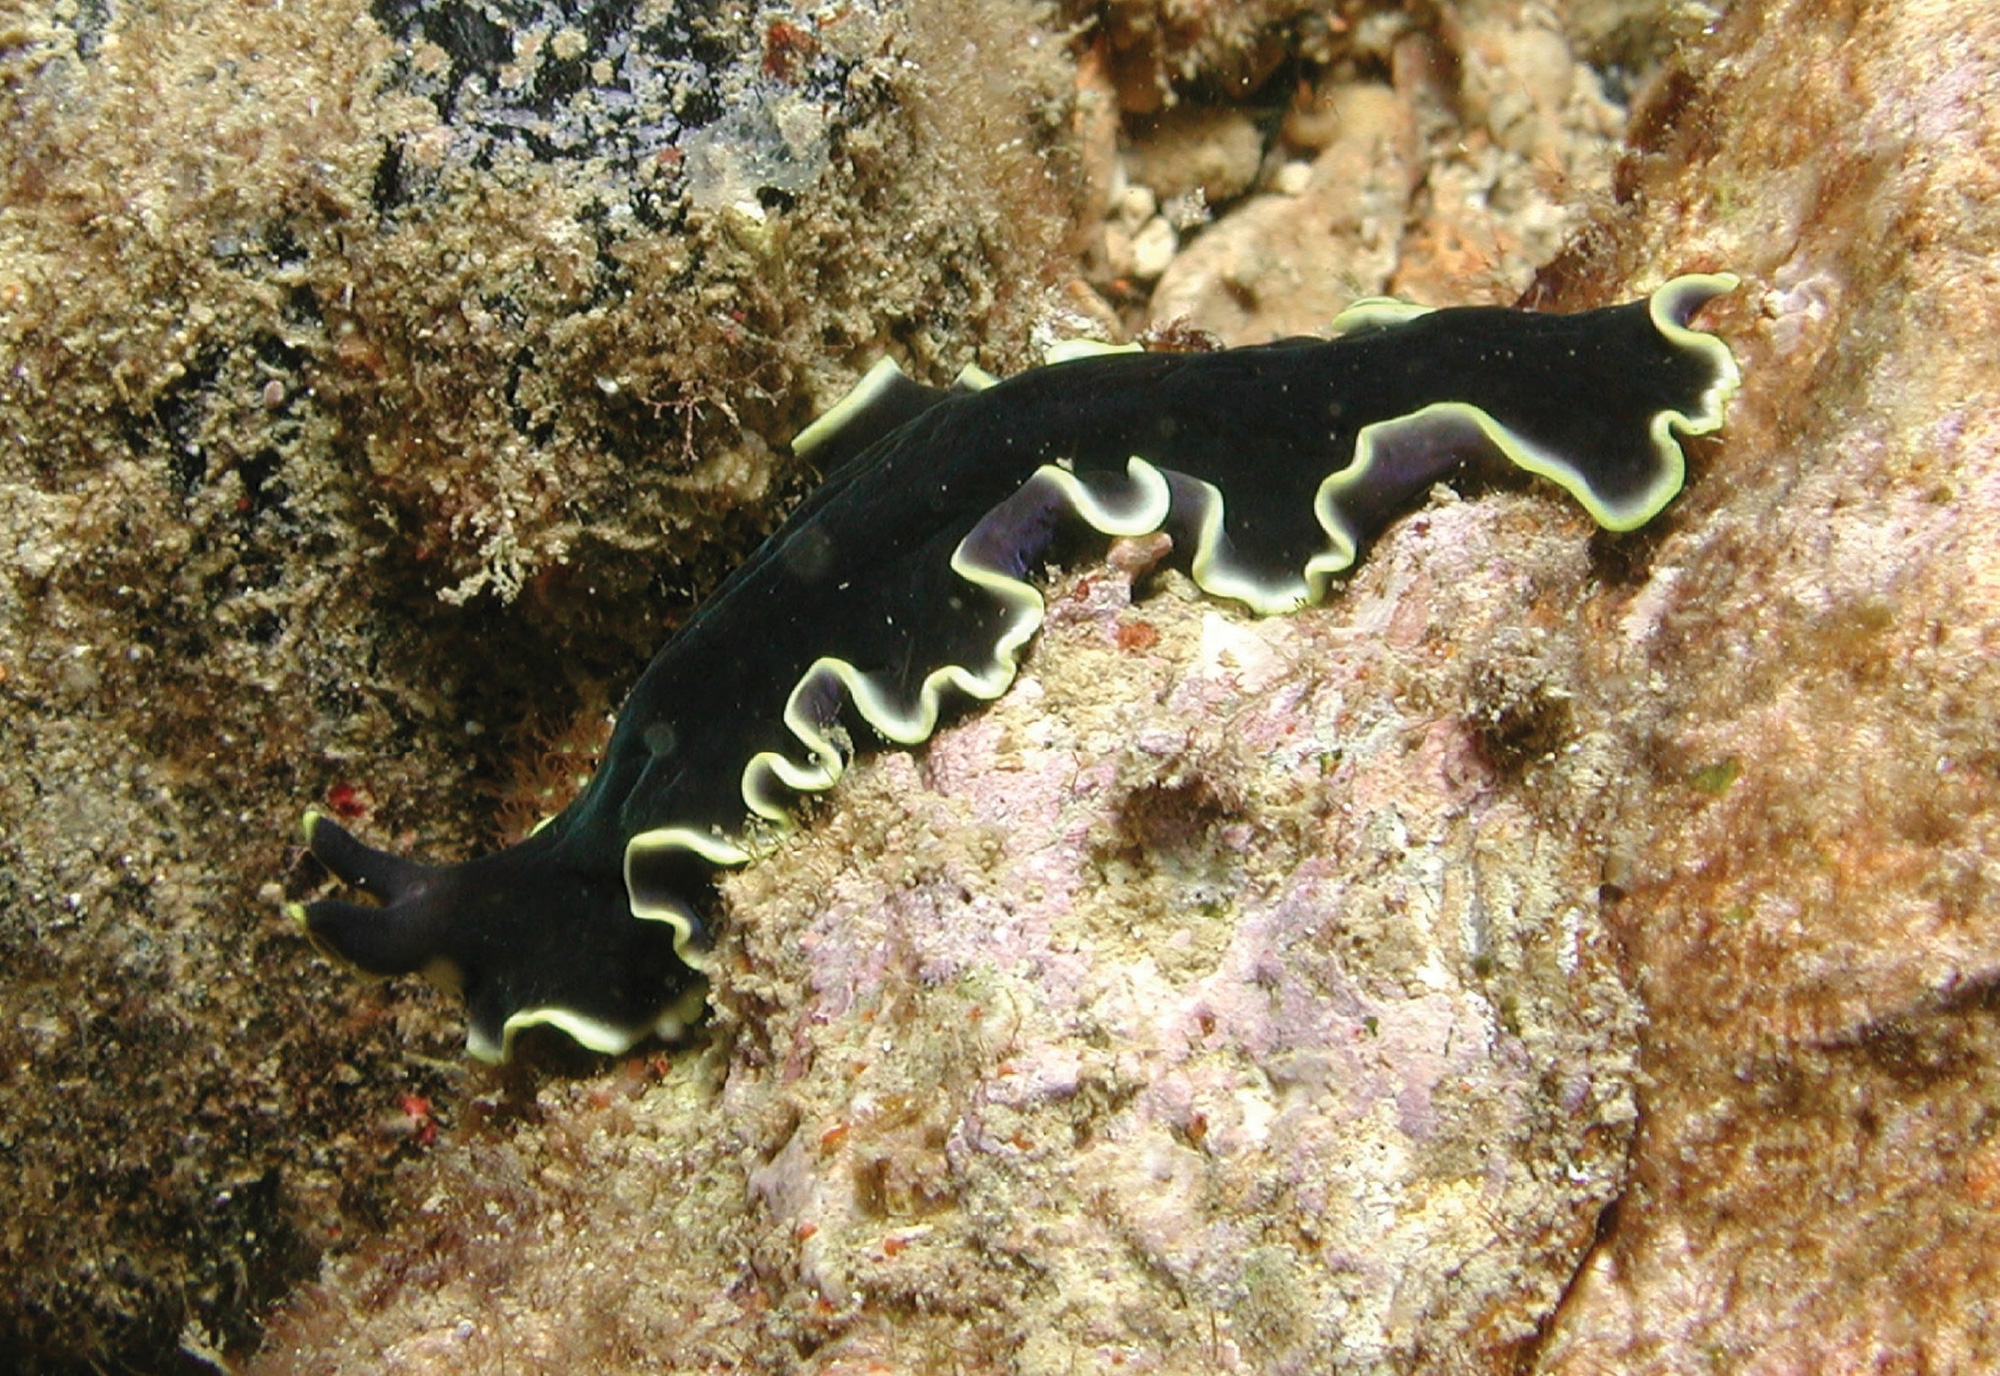 The crenellation that this flatworm exhibits is an example of hyperbolic geometry. Photo Ria Tan.